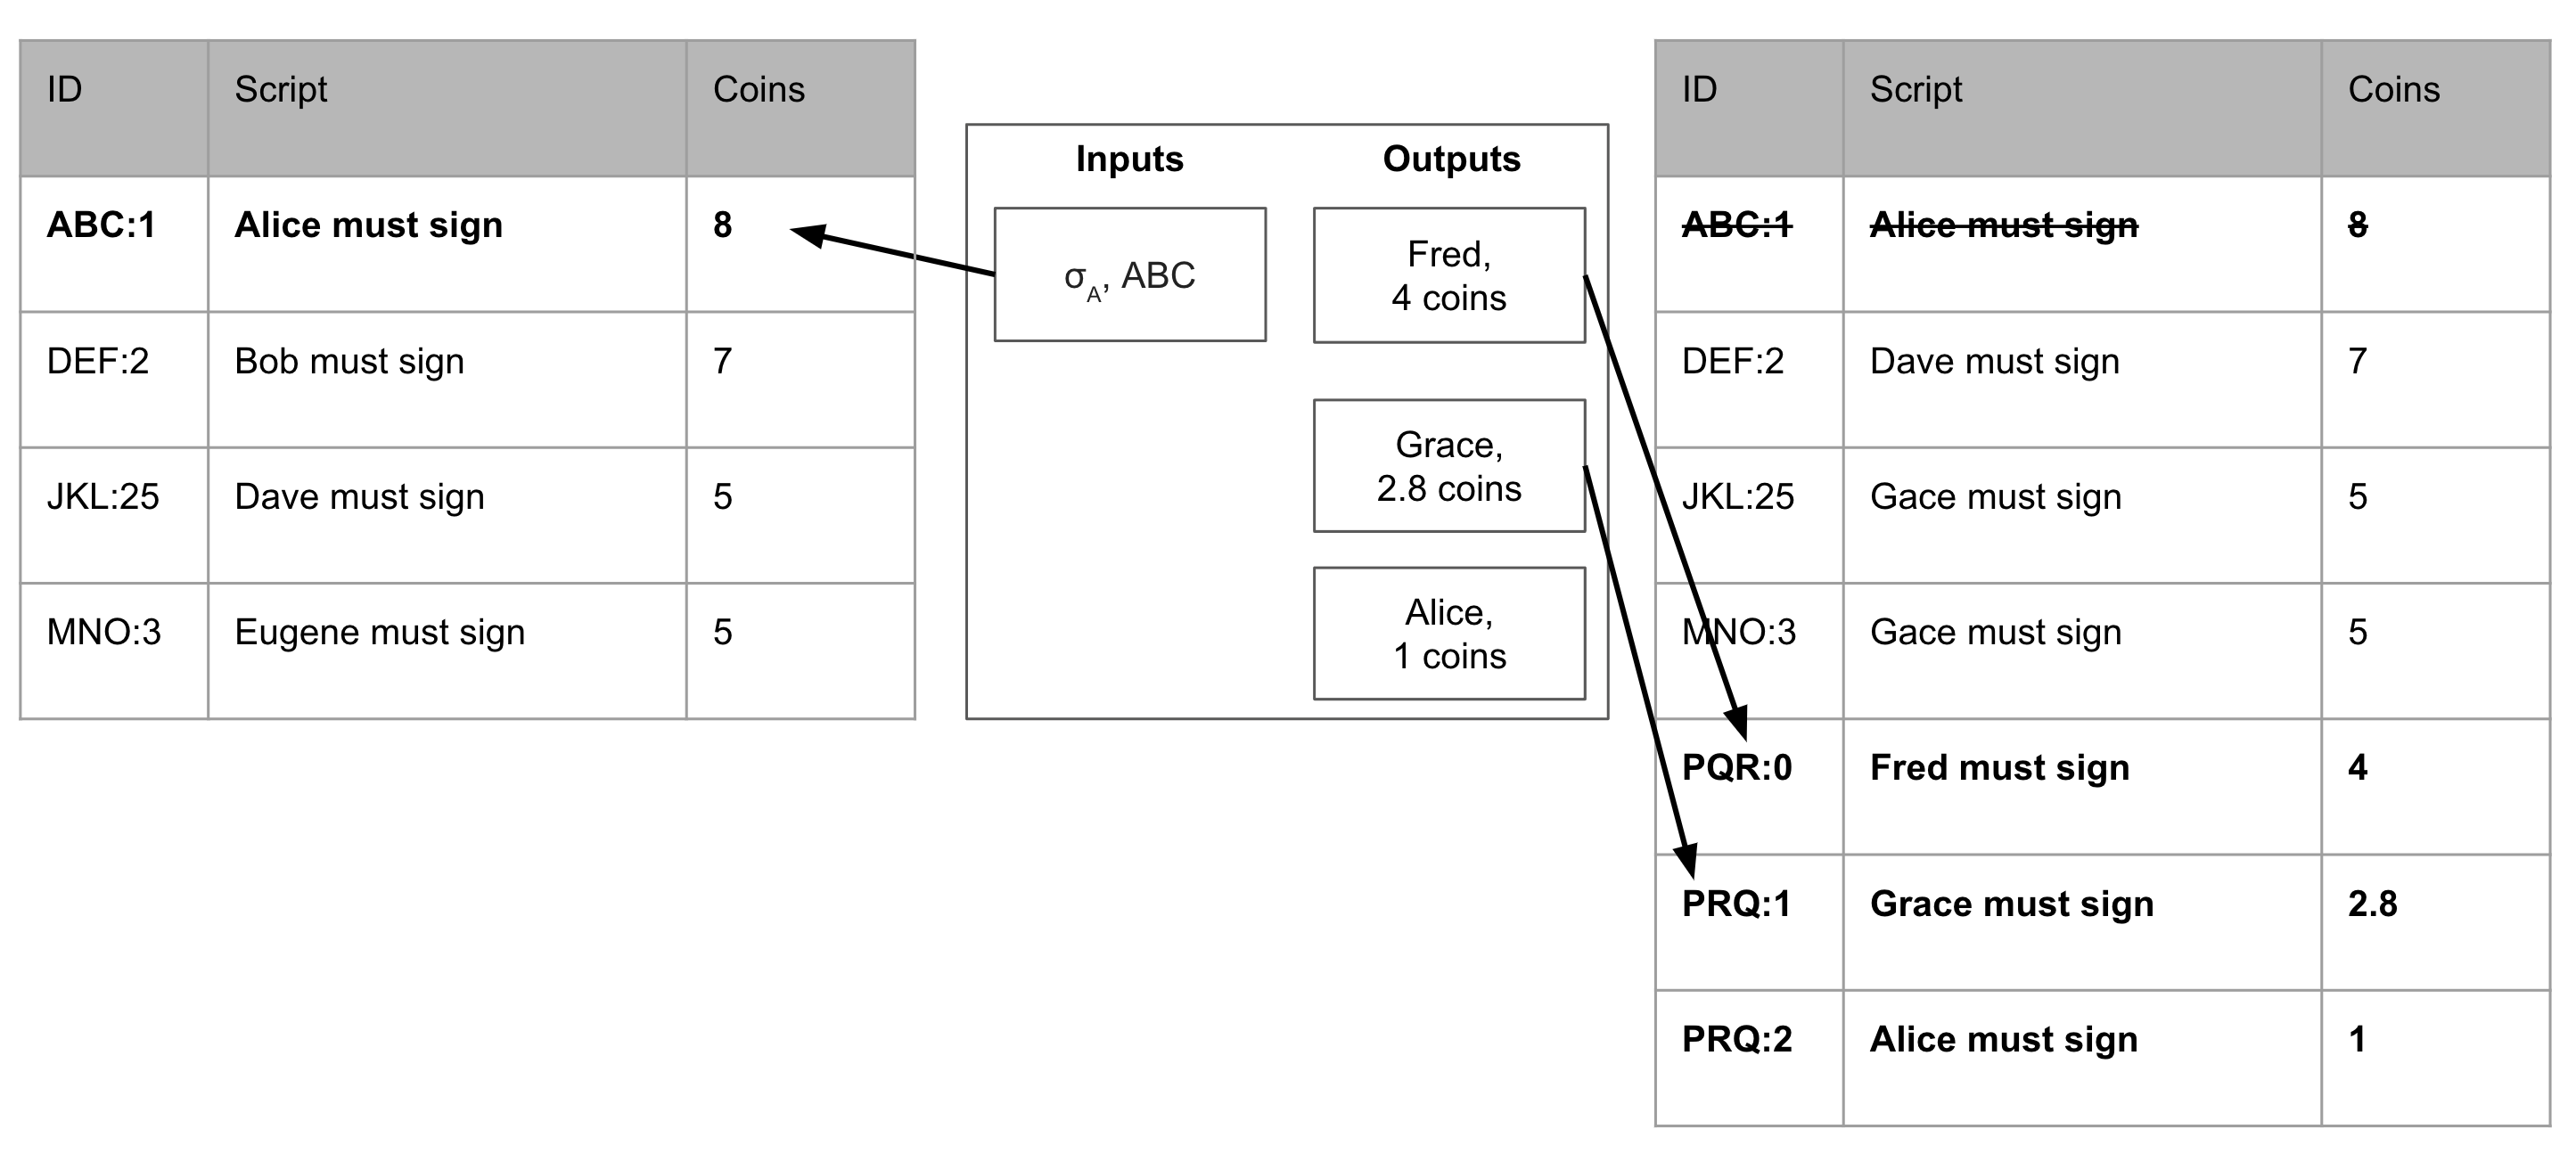 Figure 3: An example of how a transaction changes the database in Bitcoin